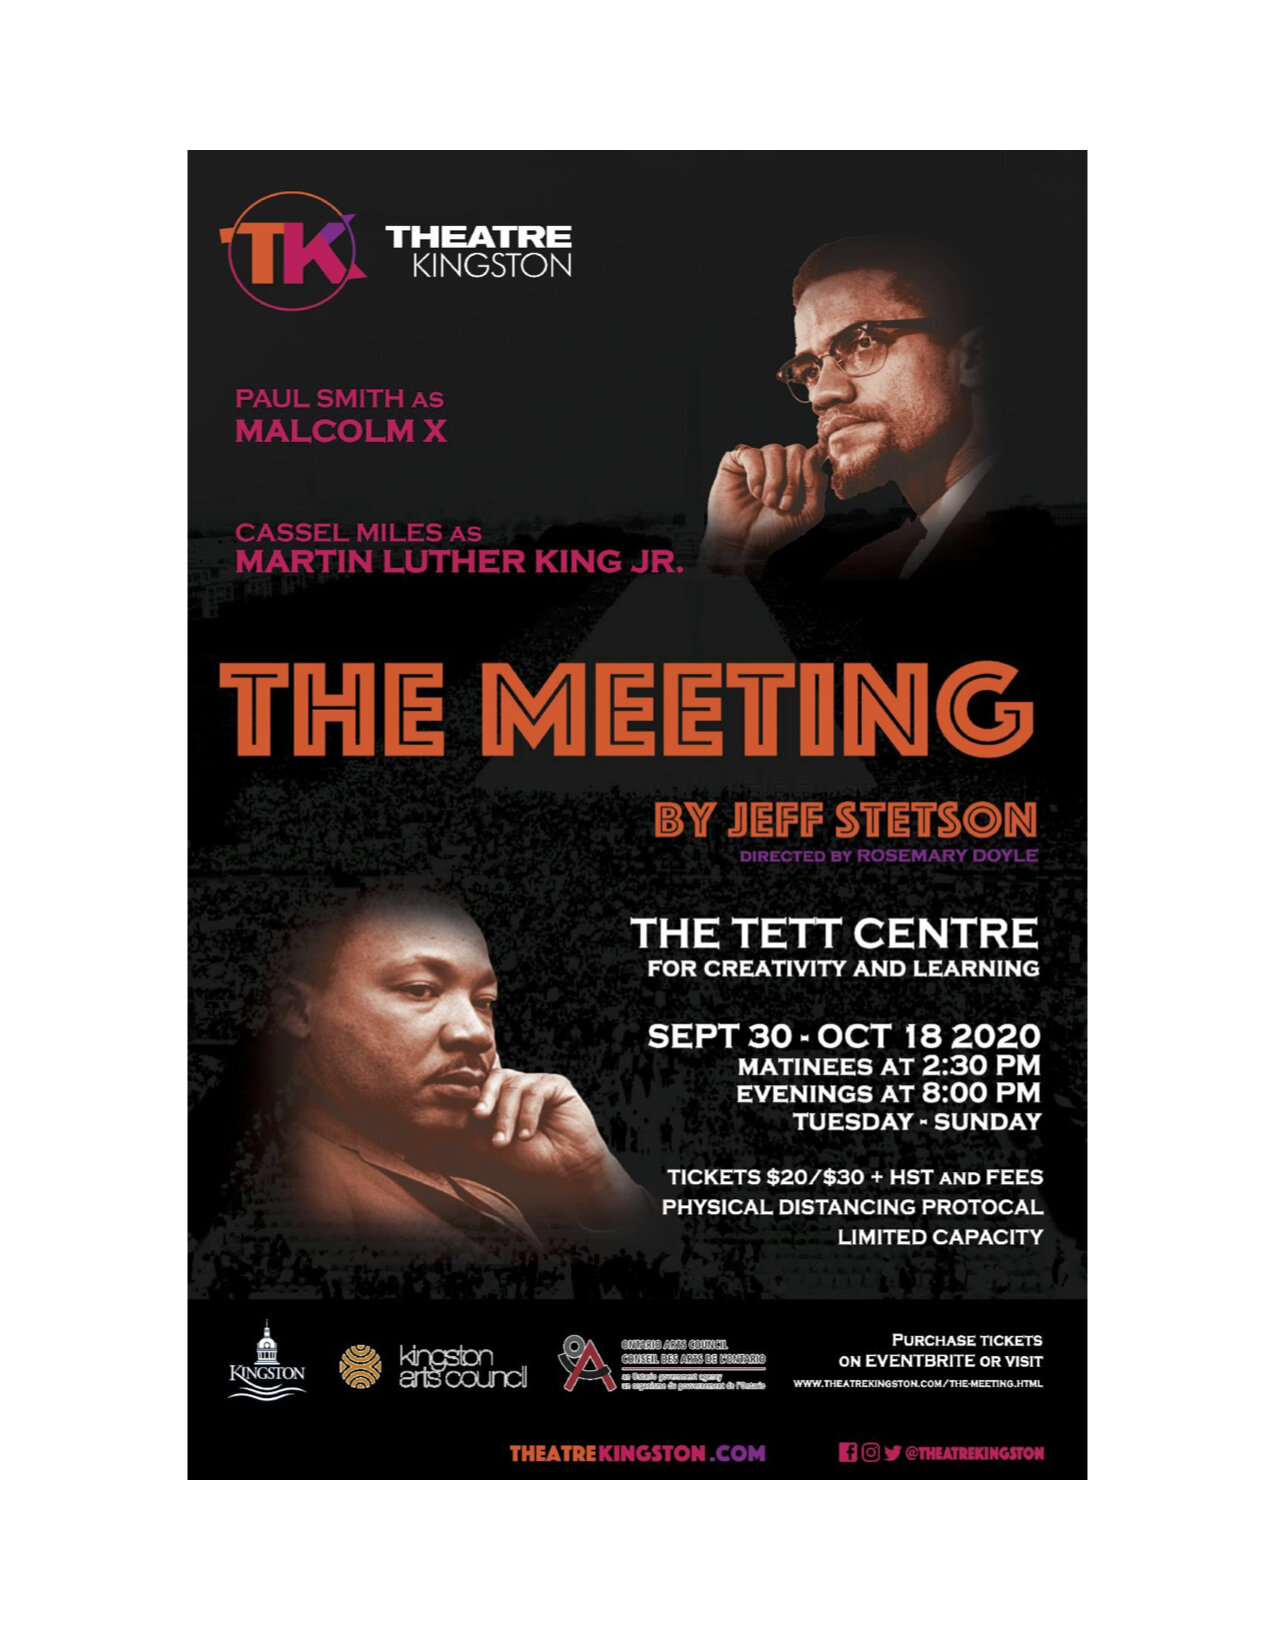 The Meeting Show Poster.jpg